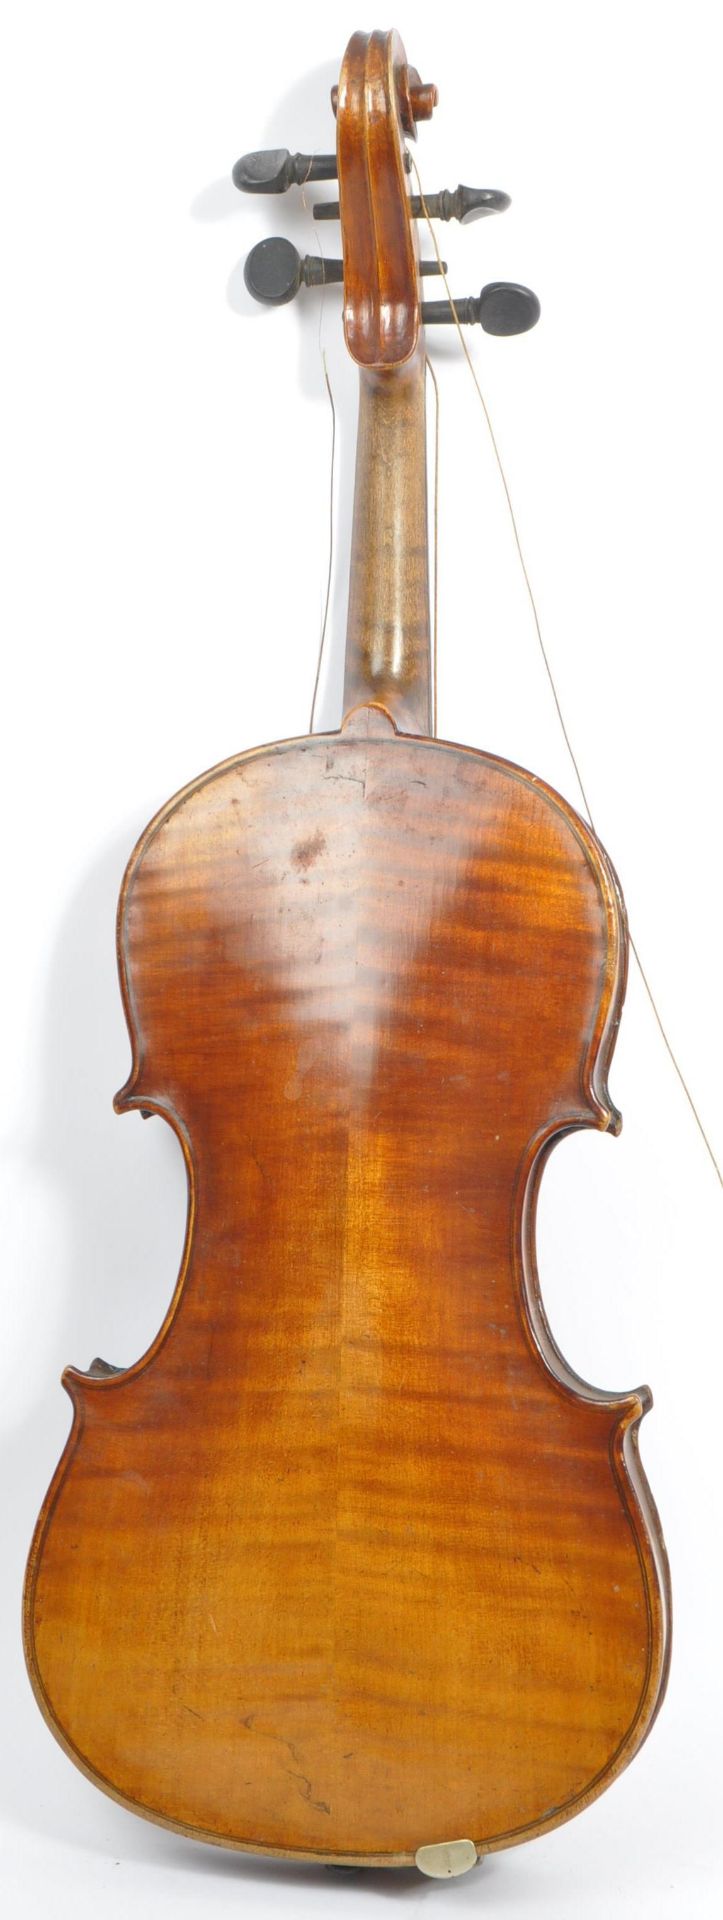 LATE 19TH / EARLY 20TH CENTURY FULL SIZE VIOLIN - Image 3 of 7